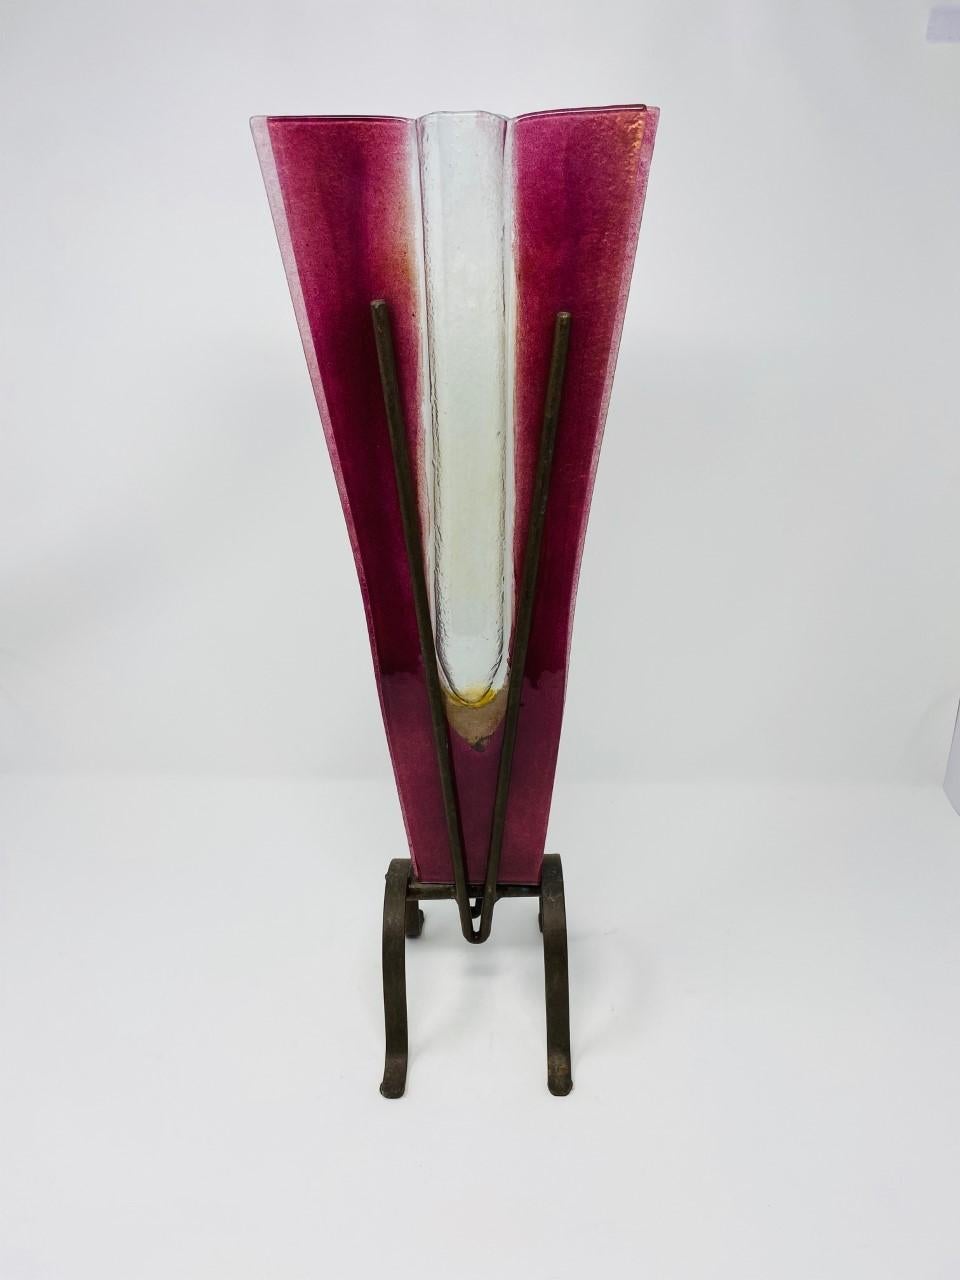 Impactful piece of glass that brings lines and design to your décor. This postmodern piece consists of two pieces: Blown glass in a purple hue is conjoined and shaped into a V shaped vessel. A metal base holds the glass vessel in place adding height